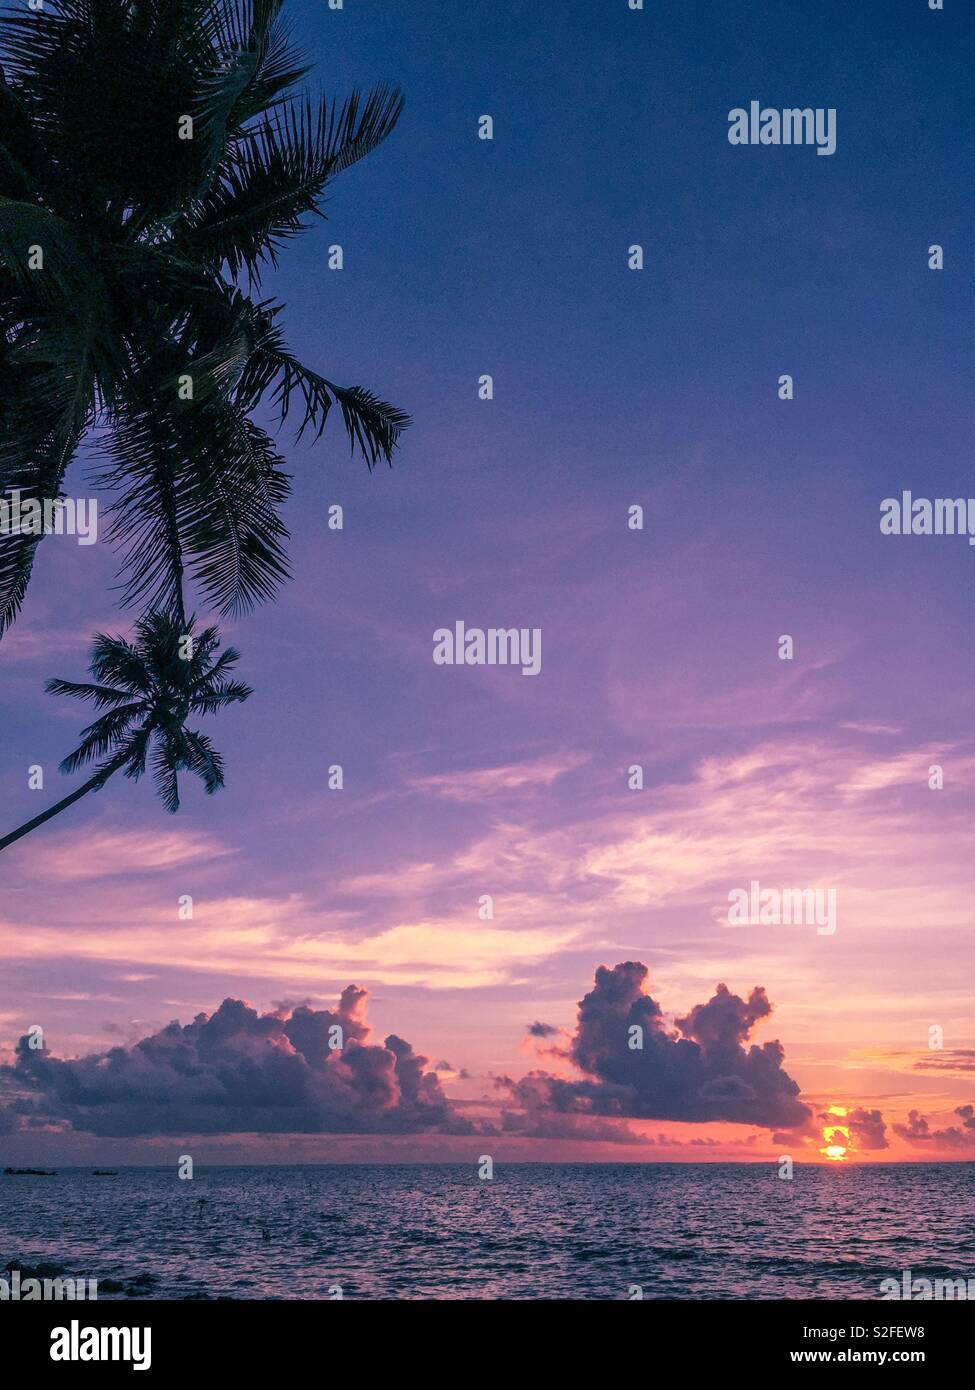 Tropical sunset time. A a beach in Yap island, Federated States of Micronesia Stock Photo